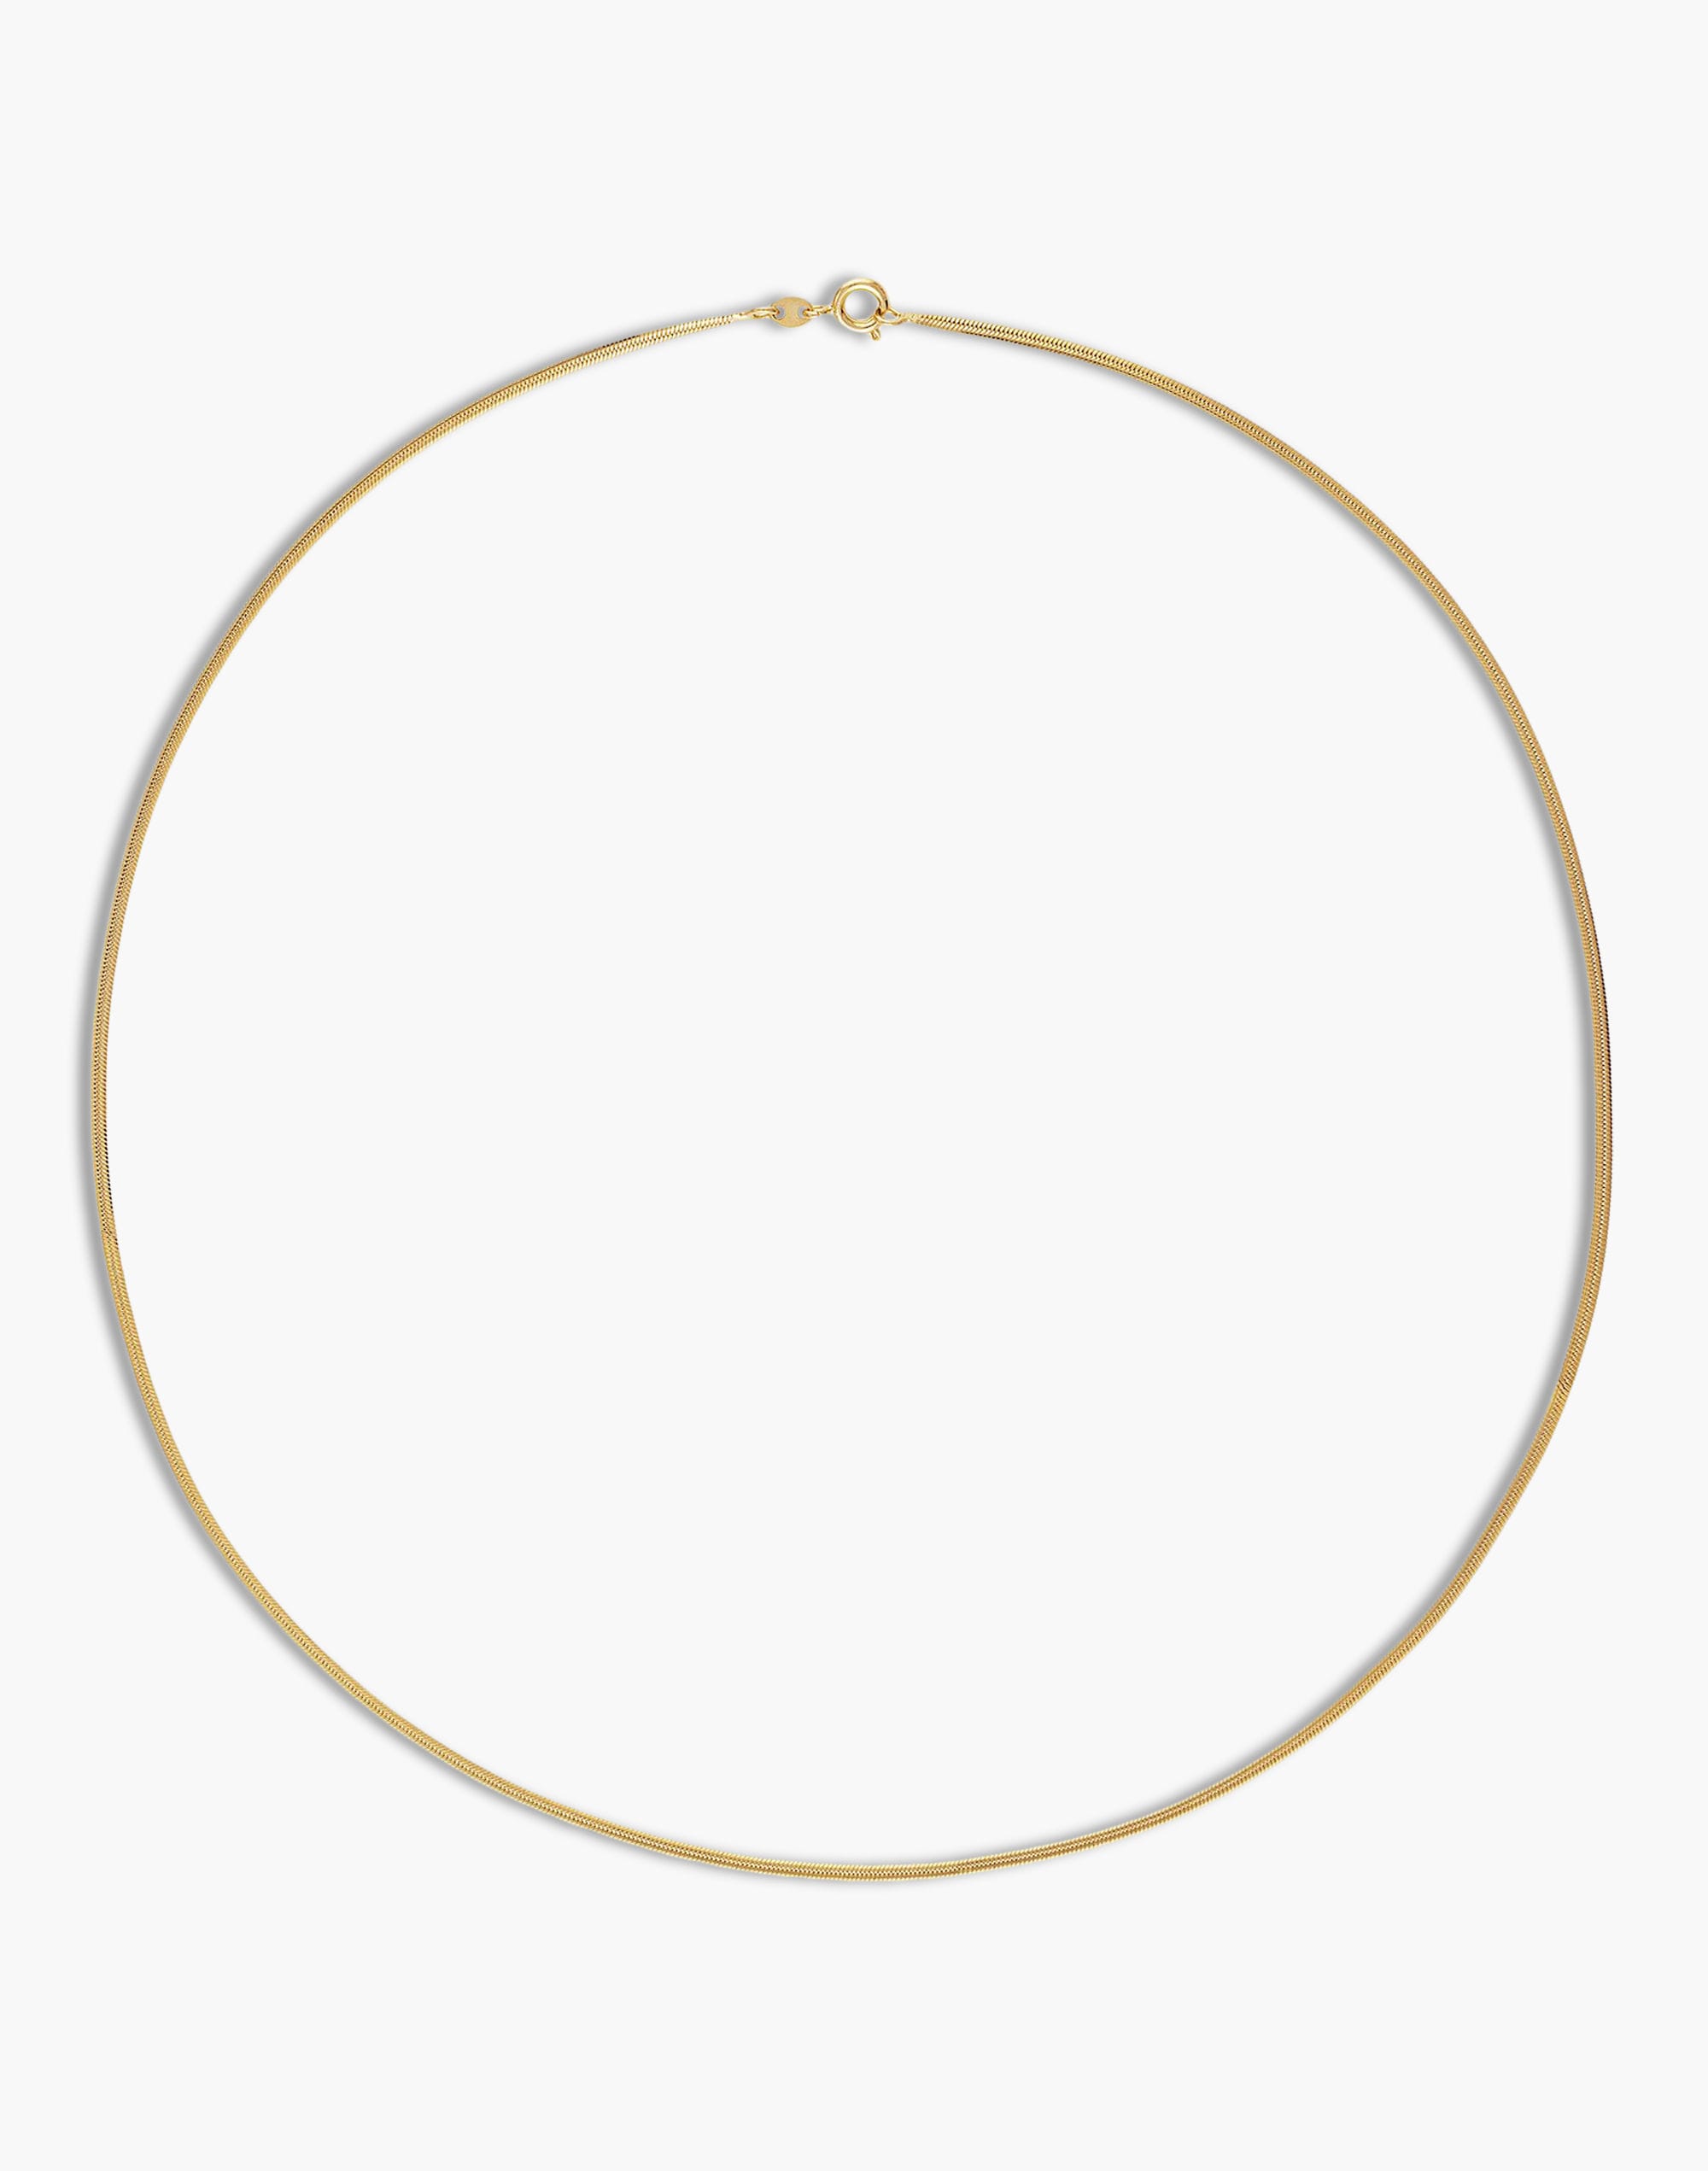 Mw Alexa Leigh Mini Snake Necklace In Gold